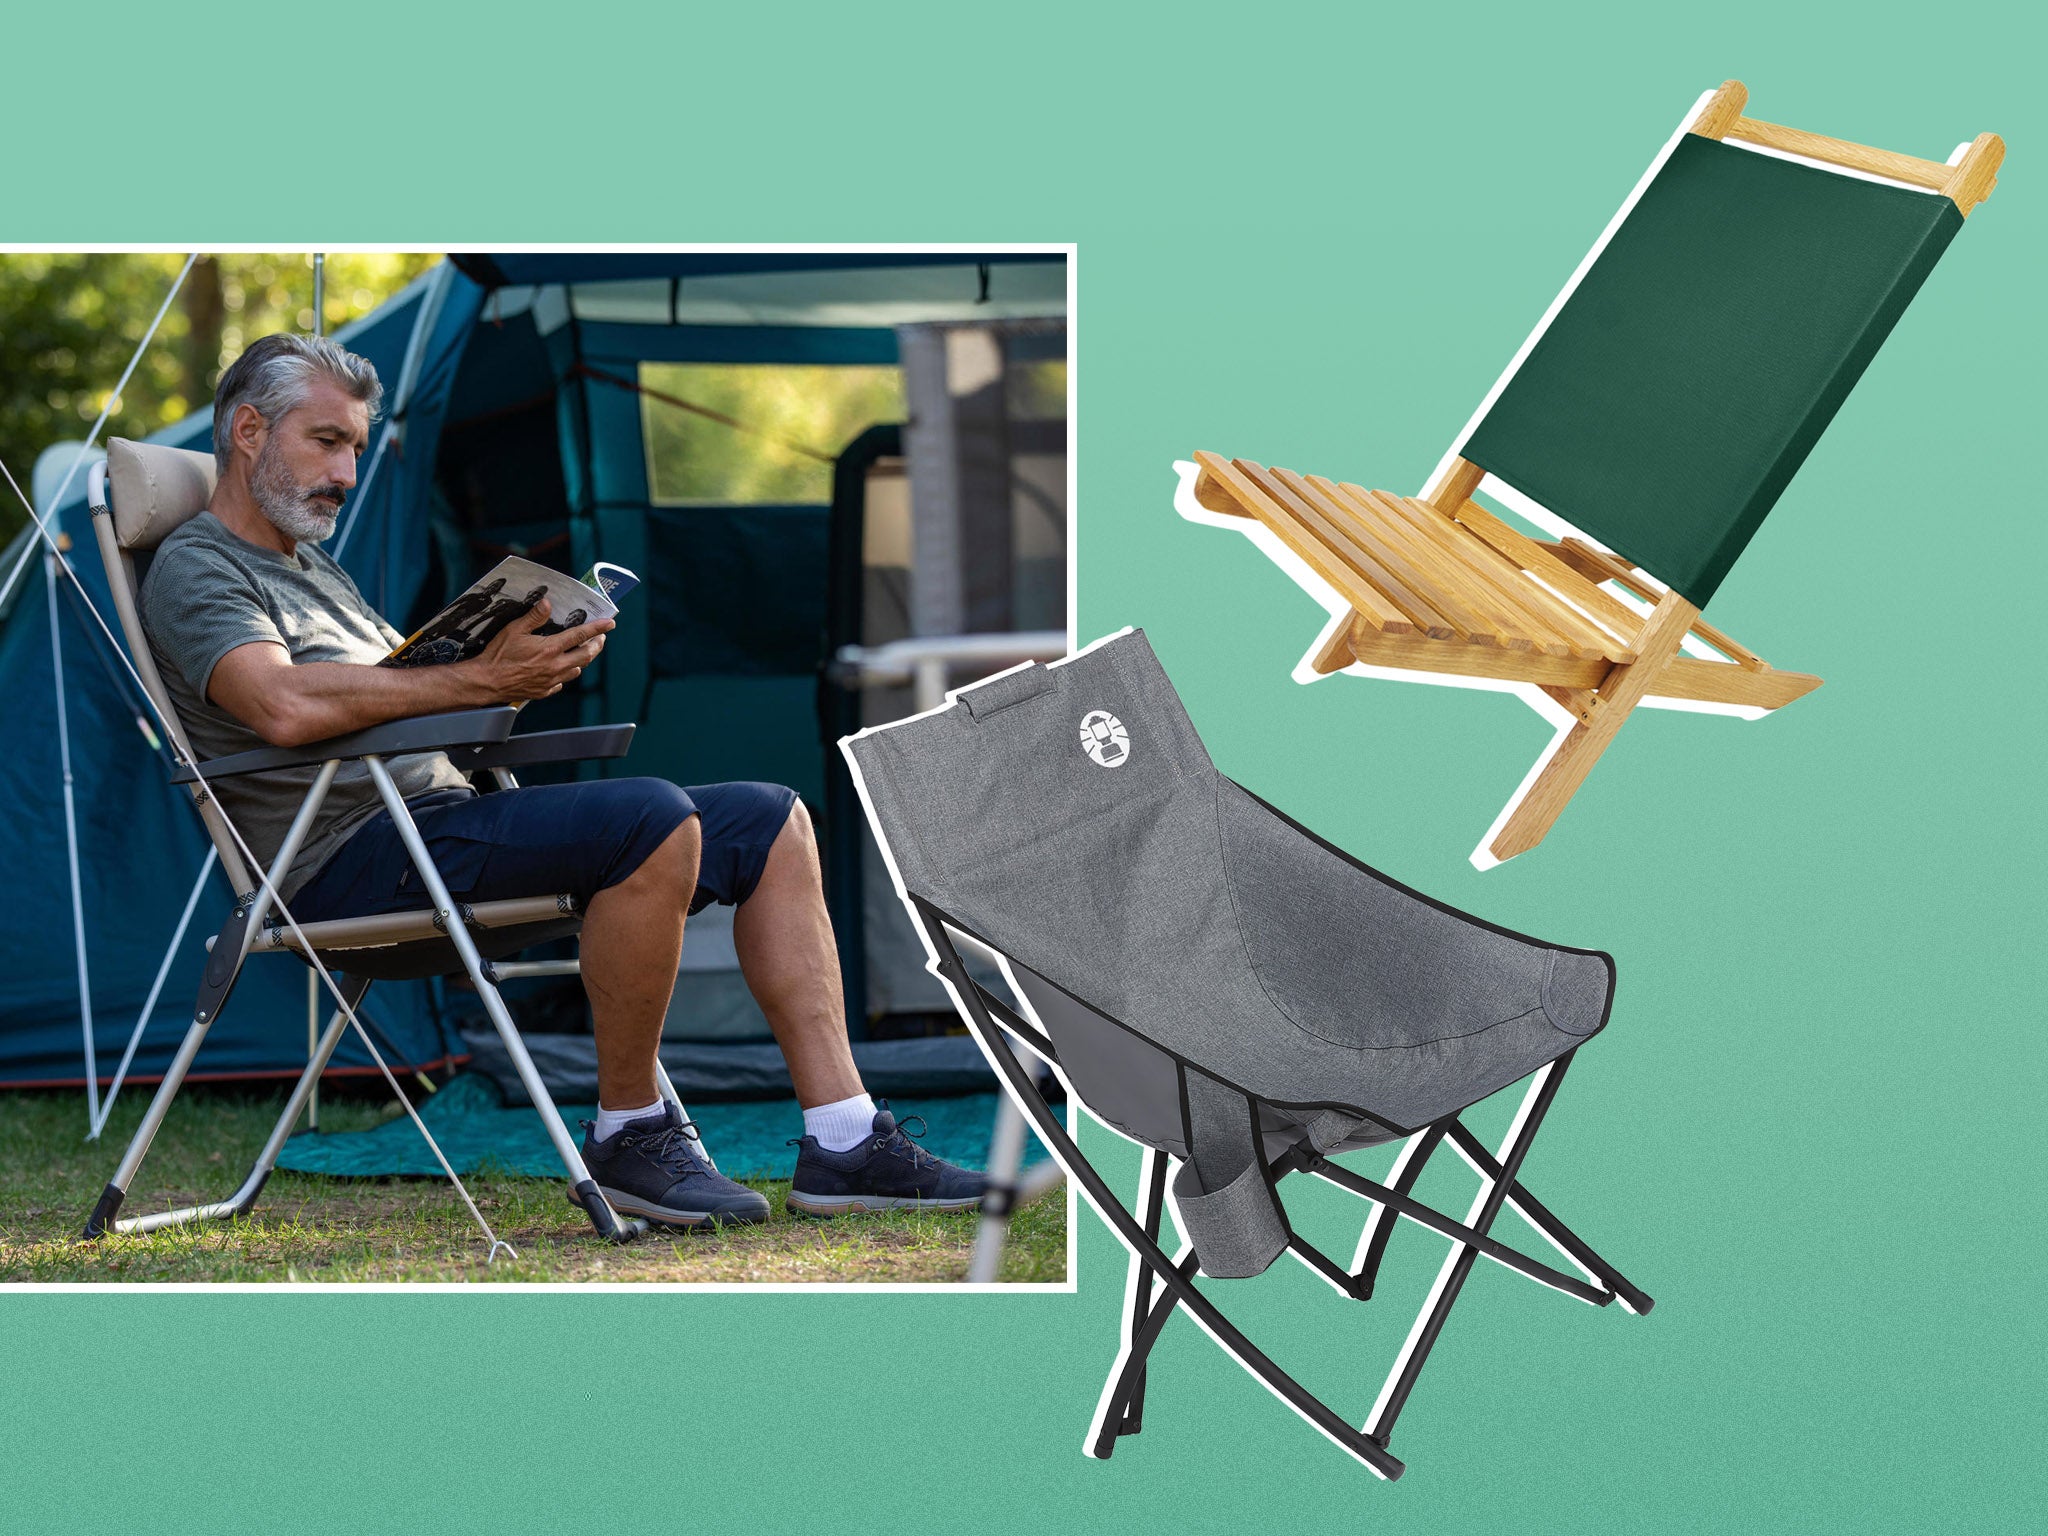 We considered maximum weight load, long-term comfort and how breathable the camping chair fabrics were